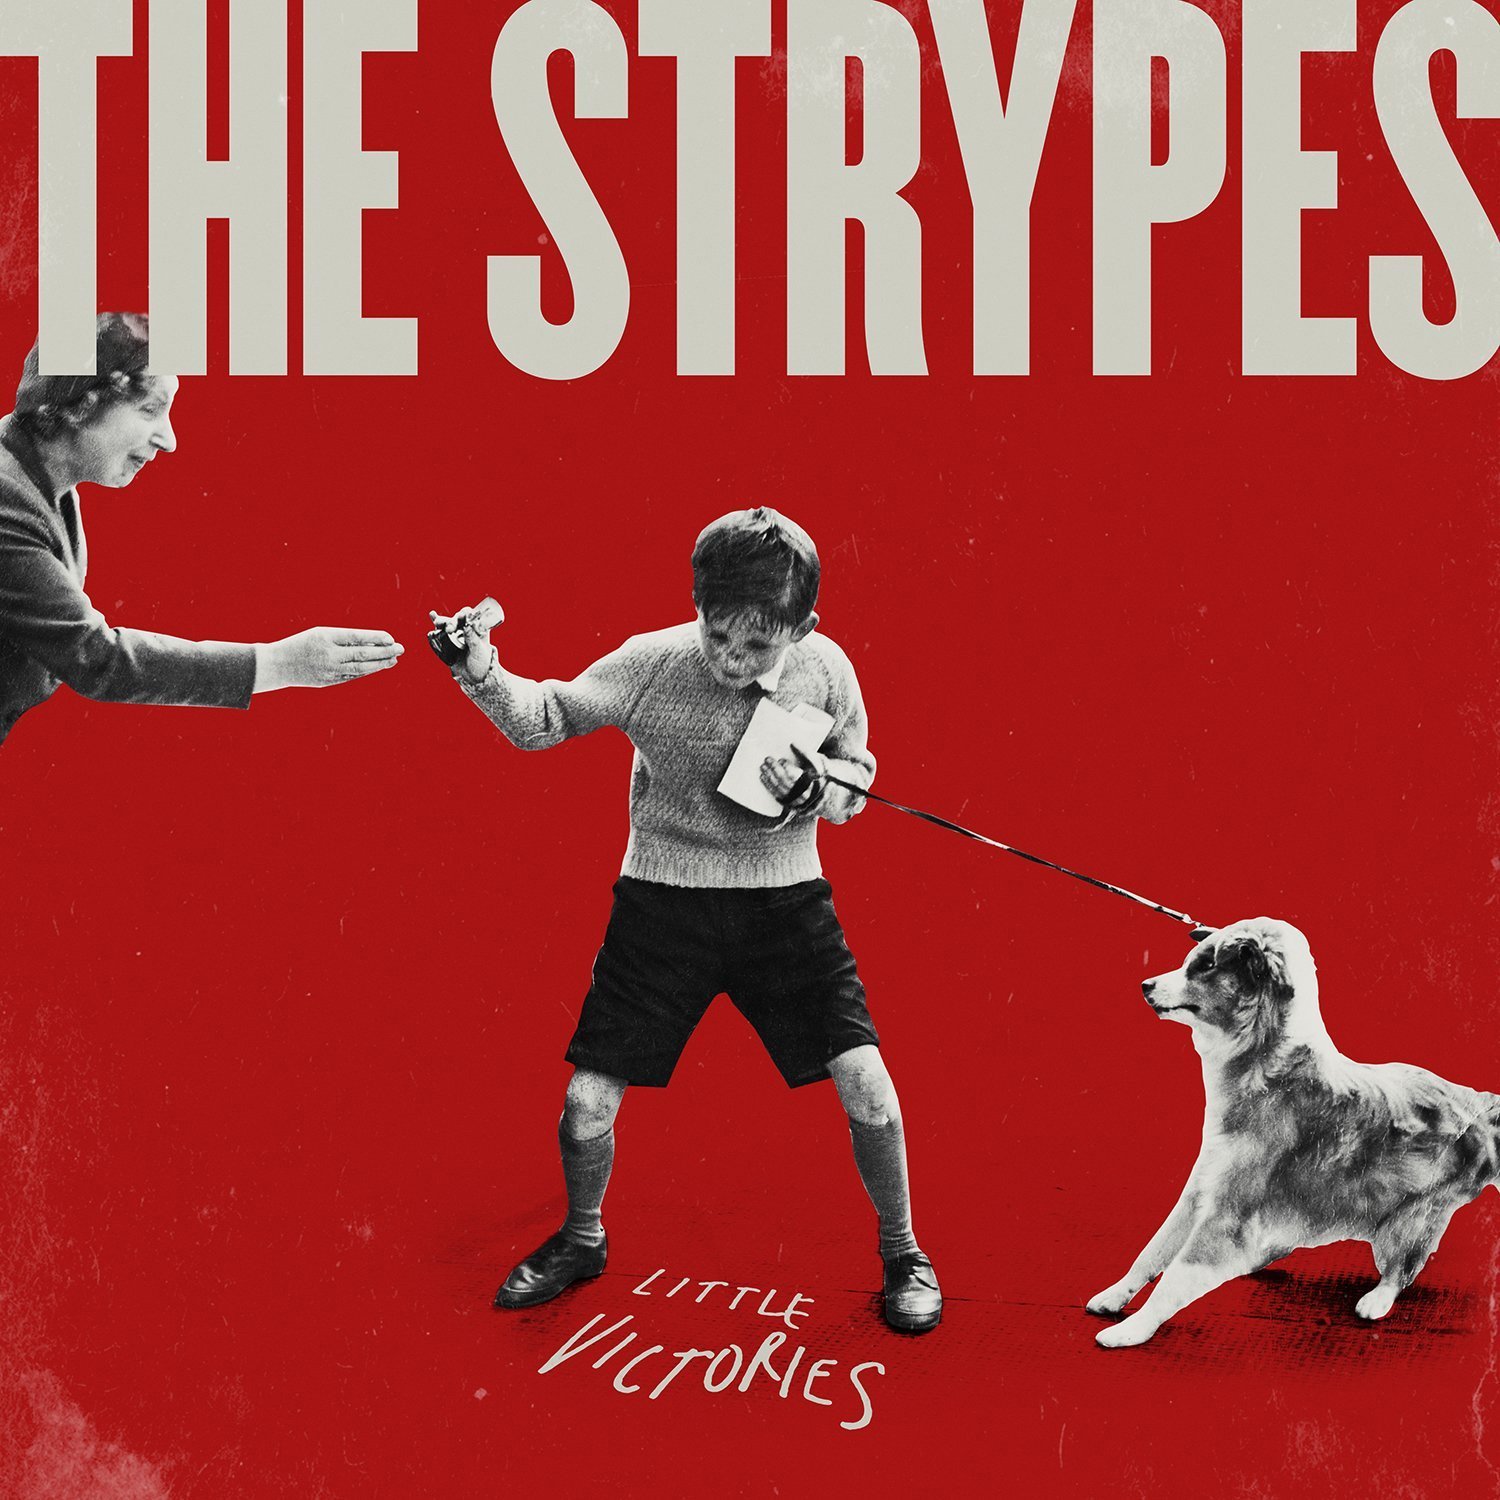 The-Strypes-Little-Victories-Review.jpg